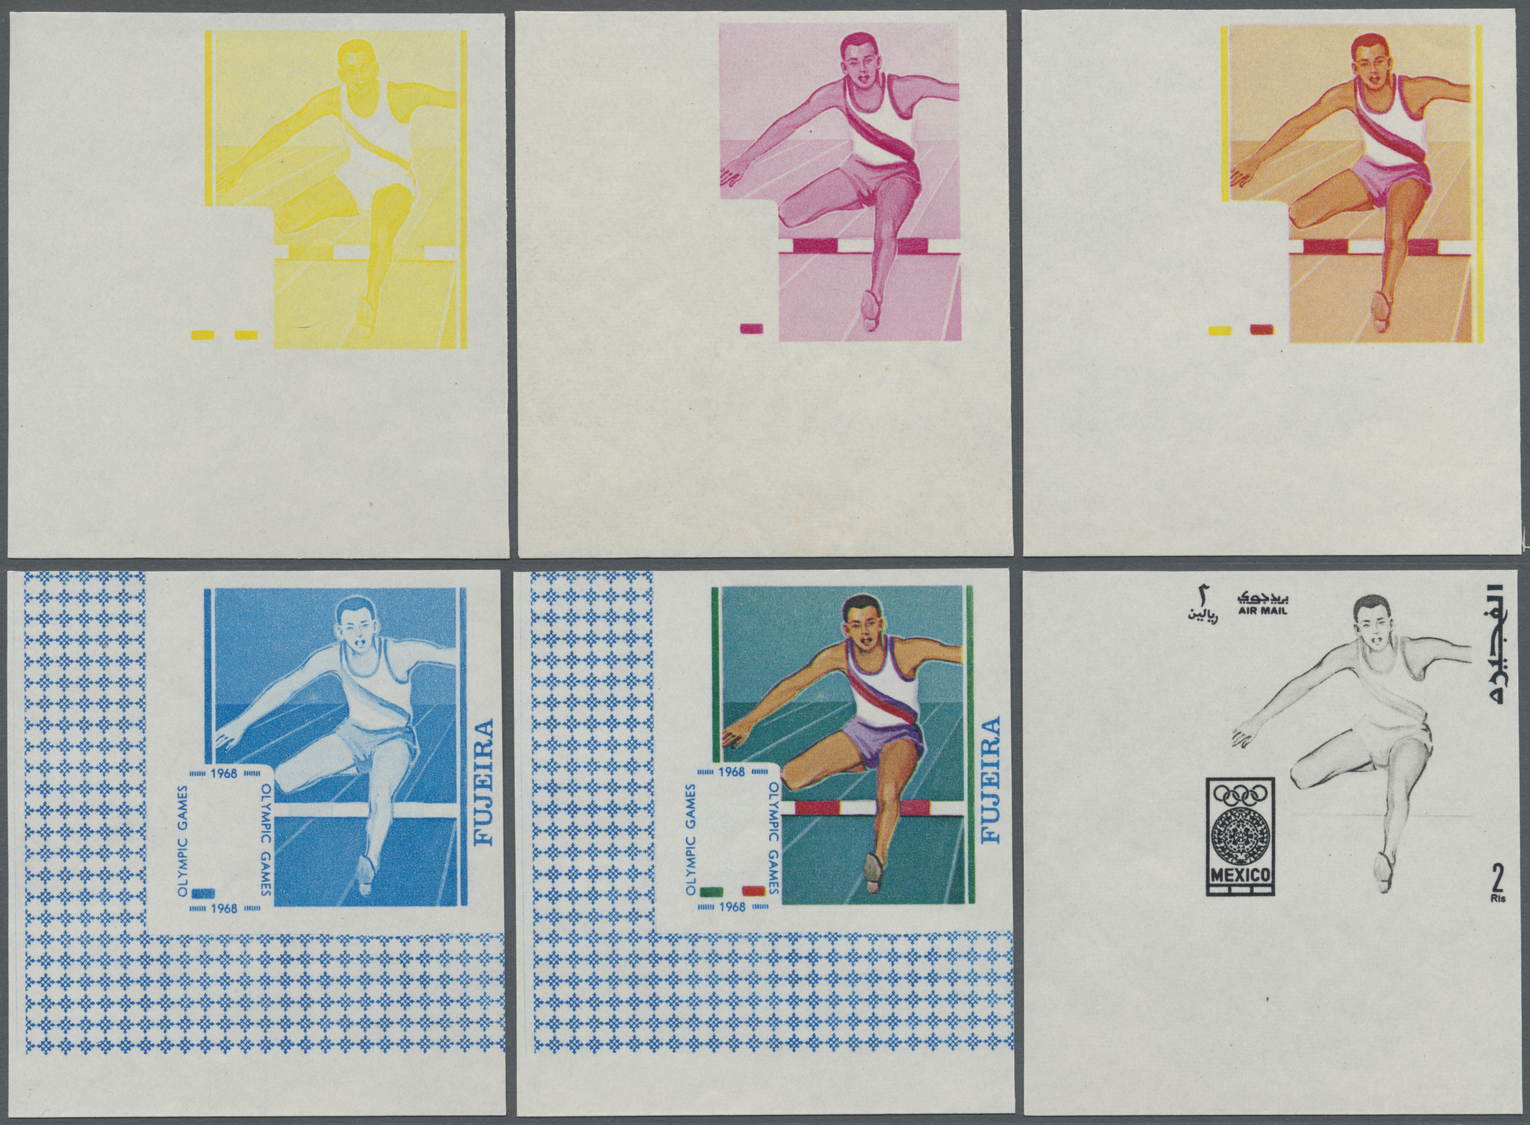 ** Fudschaira / Fujeira: 1968, Fujeira For Mexico City Summer Games. Progressive Proofs (4 Times 6 Phases) For The Sets - Fujeira